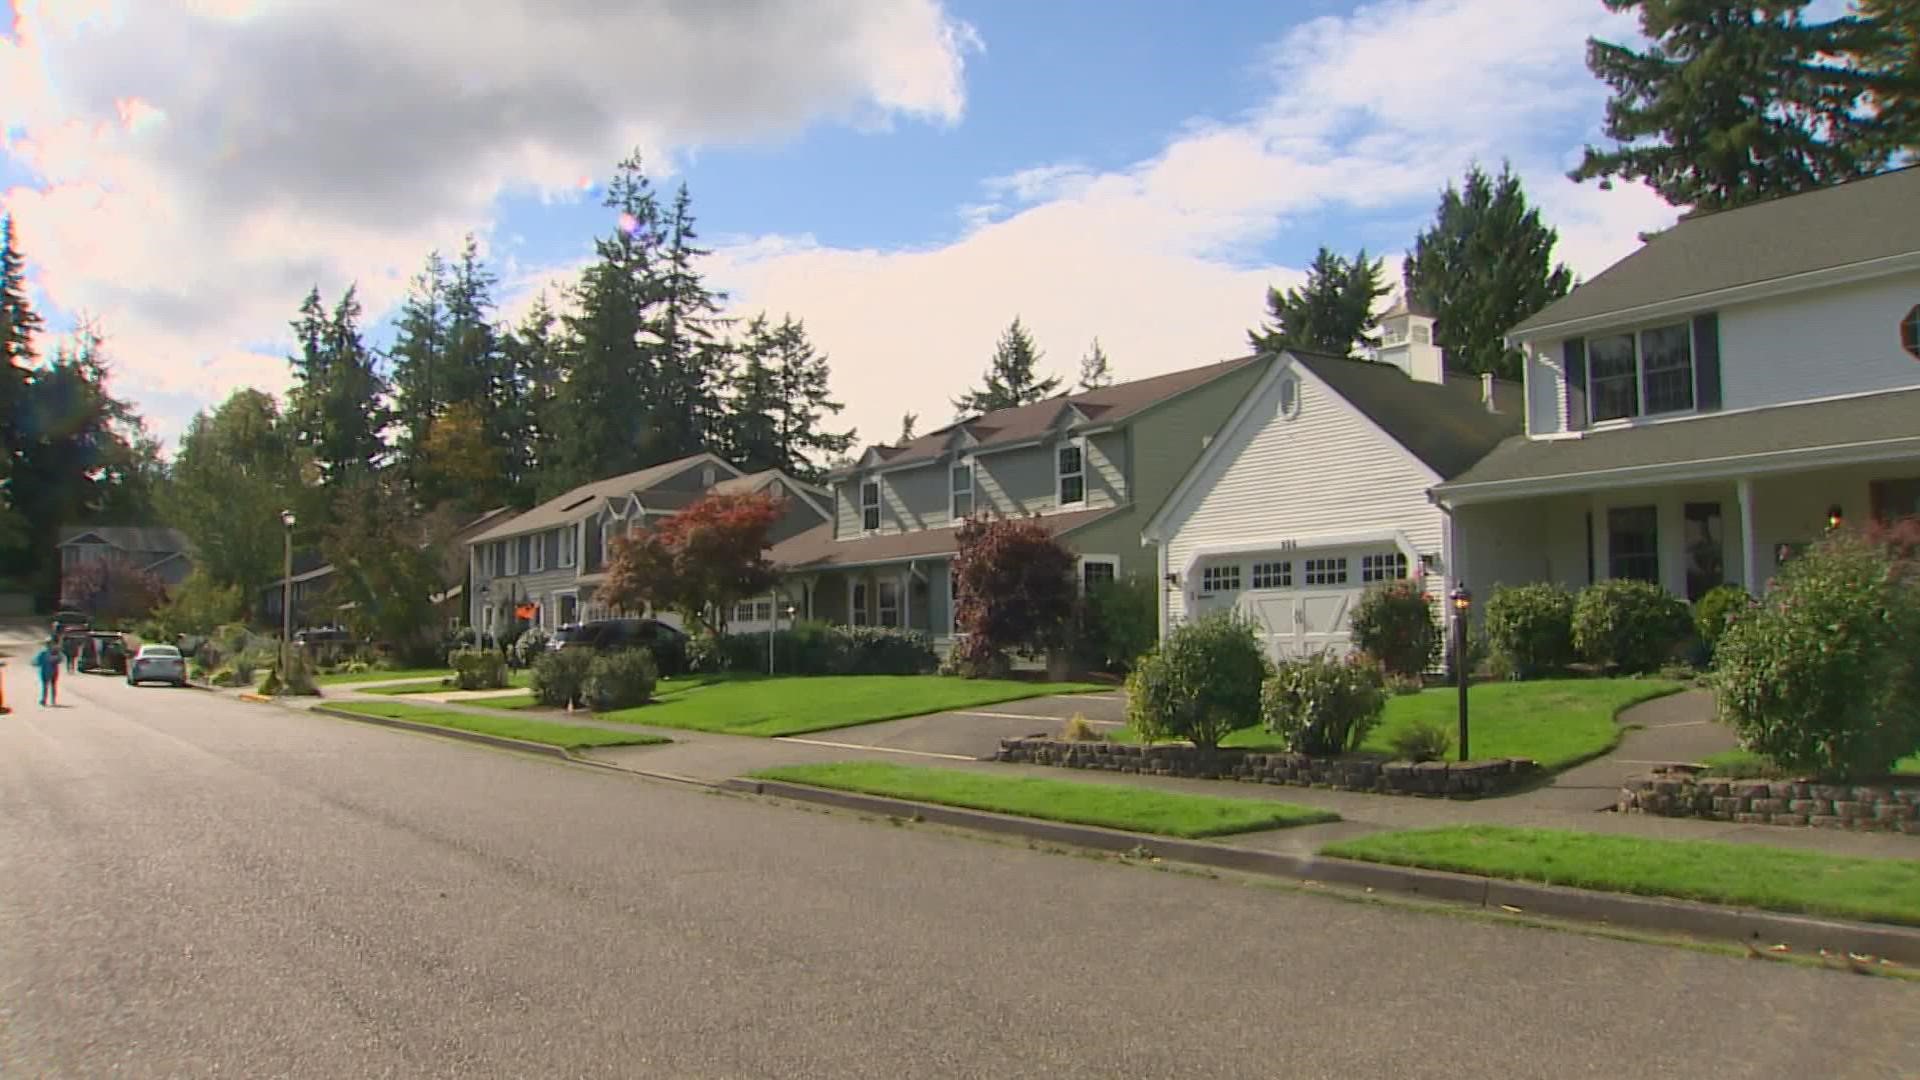 The City of Bellingham is bypassing neighborhood covenants in order to set up the shelter which will house a dozen homeless youth under the age of 18.